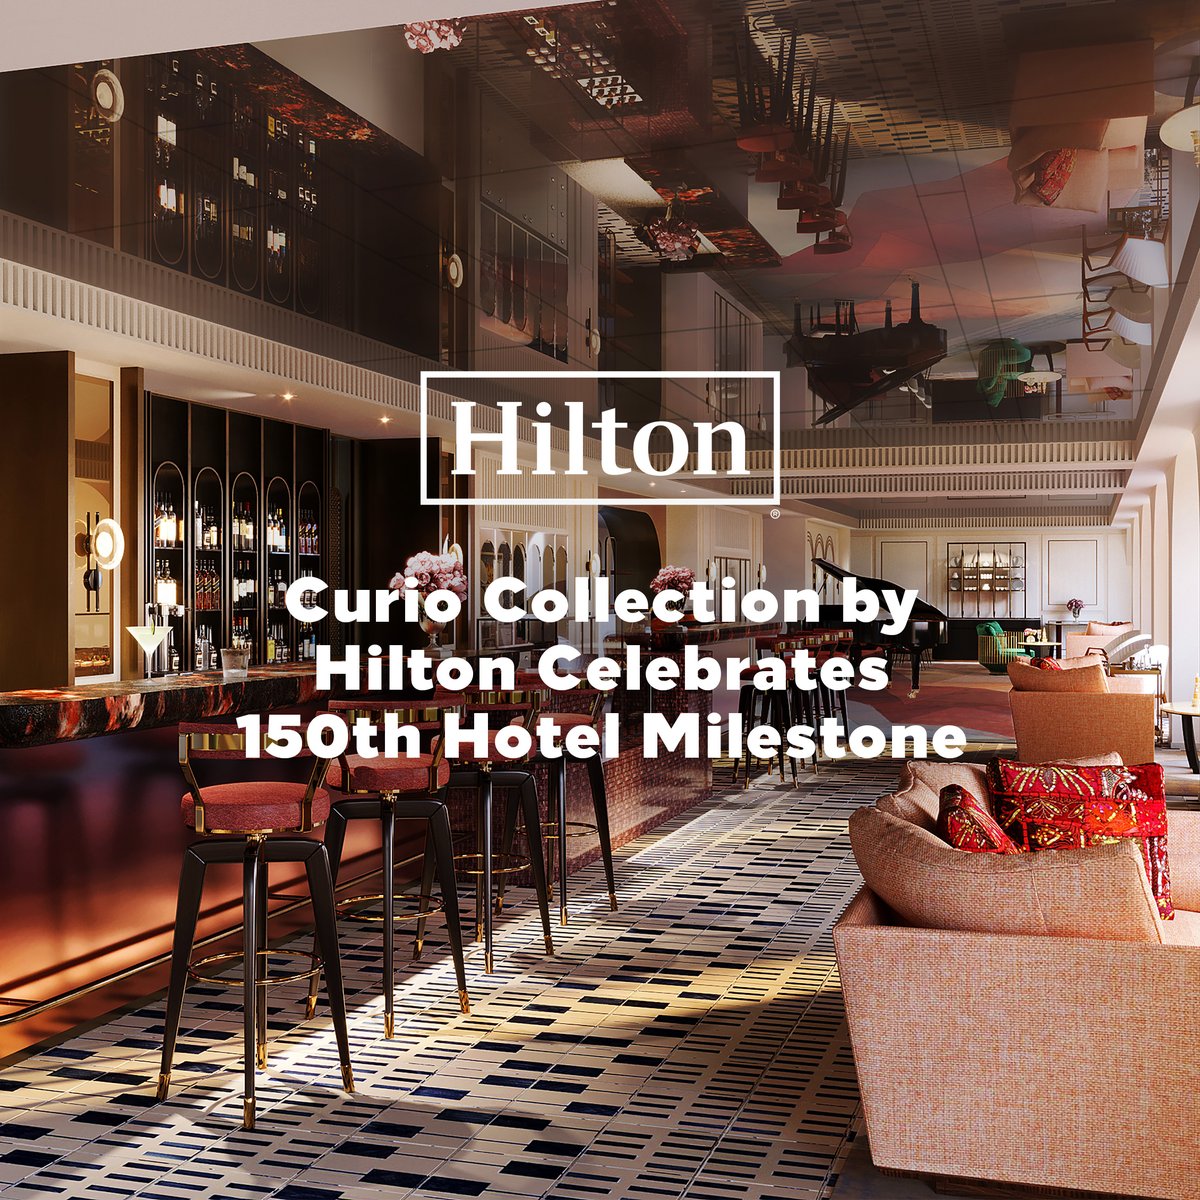 Following a year of exceptional global expansion, @CurioCollection will reach its 150th opening milestone by the end of 2023! hil.tn/87v053 #HiltonForTheStay